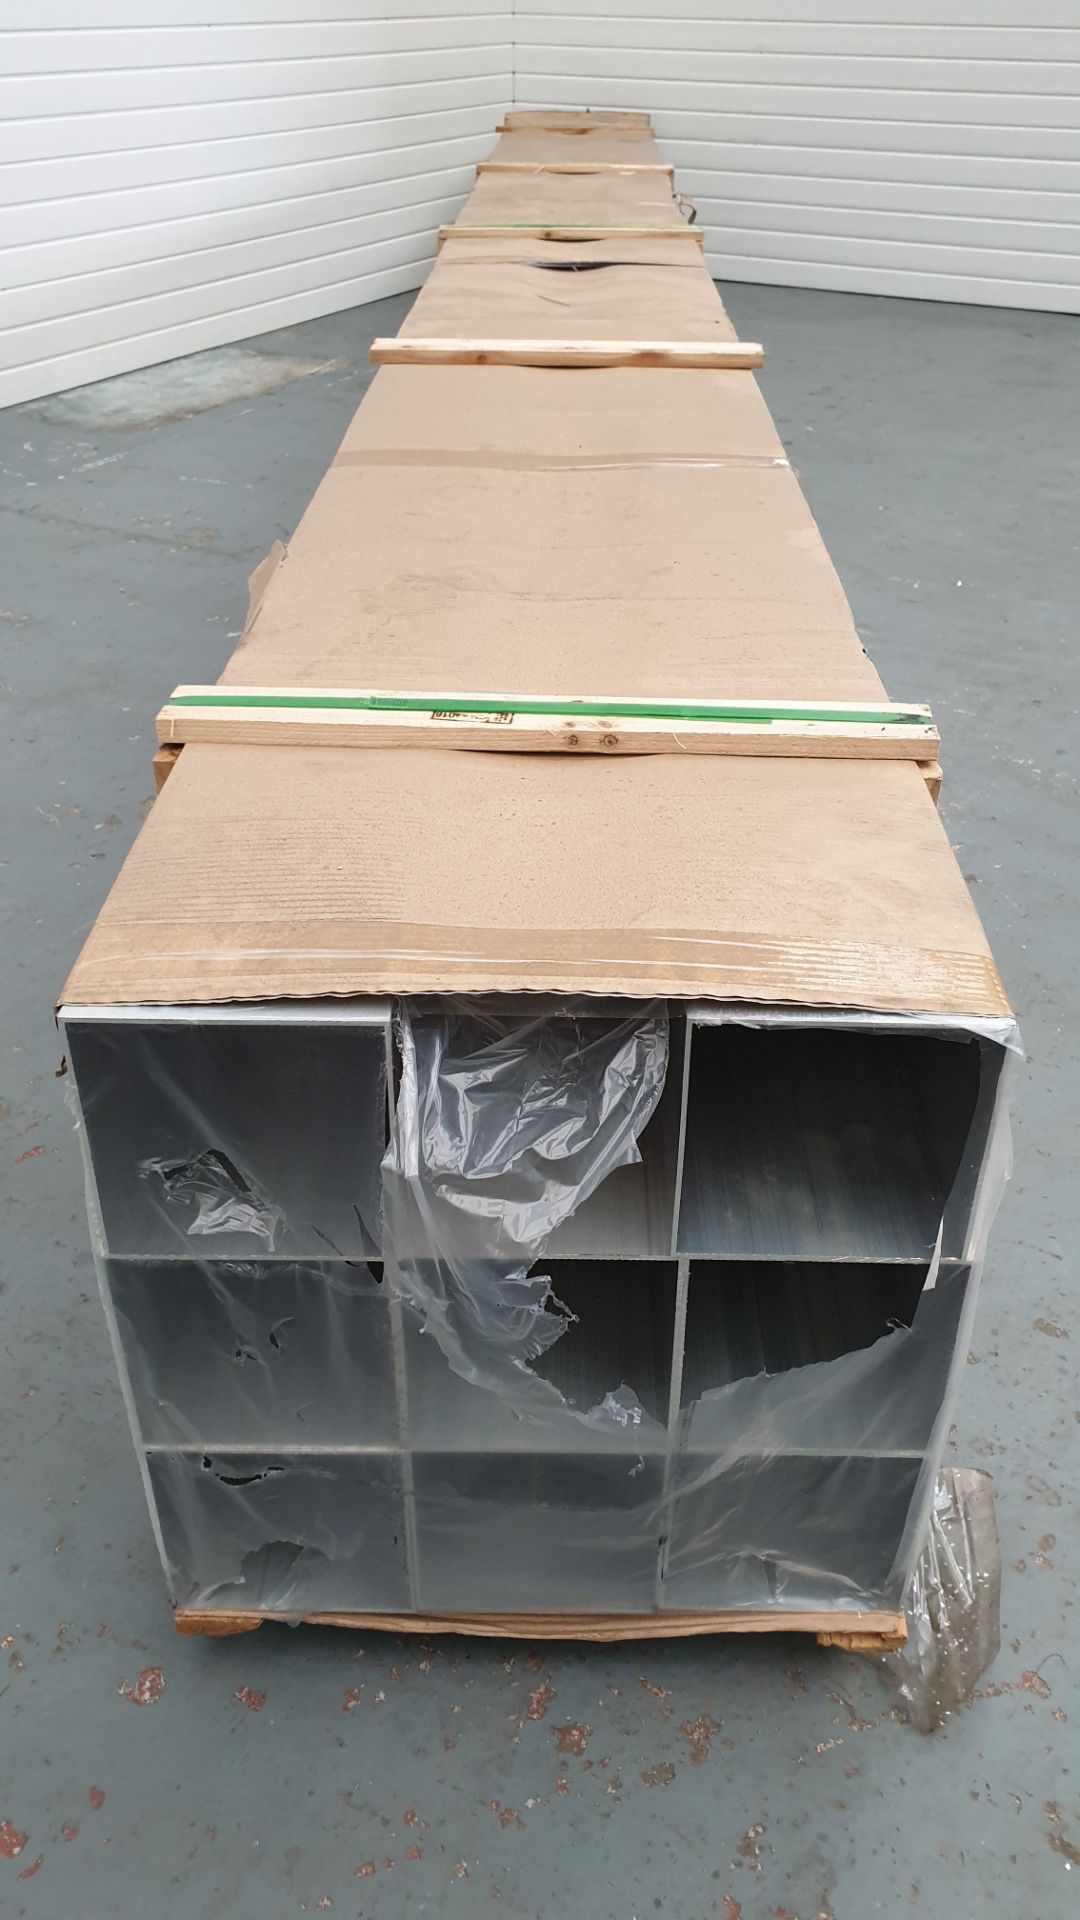 8 x Square Aluminium Hollow Section Tube Internal Size 162mm. Thickness: 3mm. Length: 6010mm.